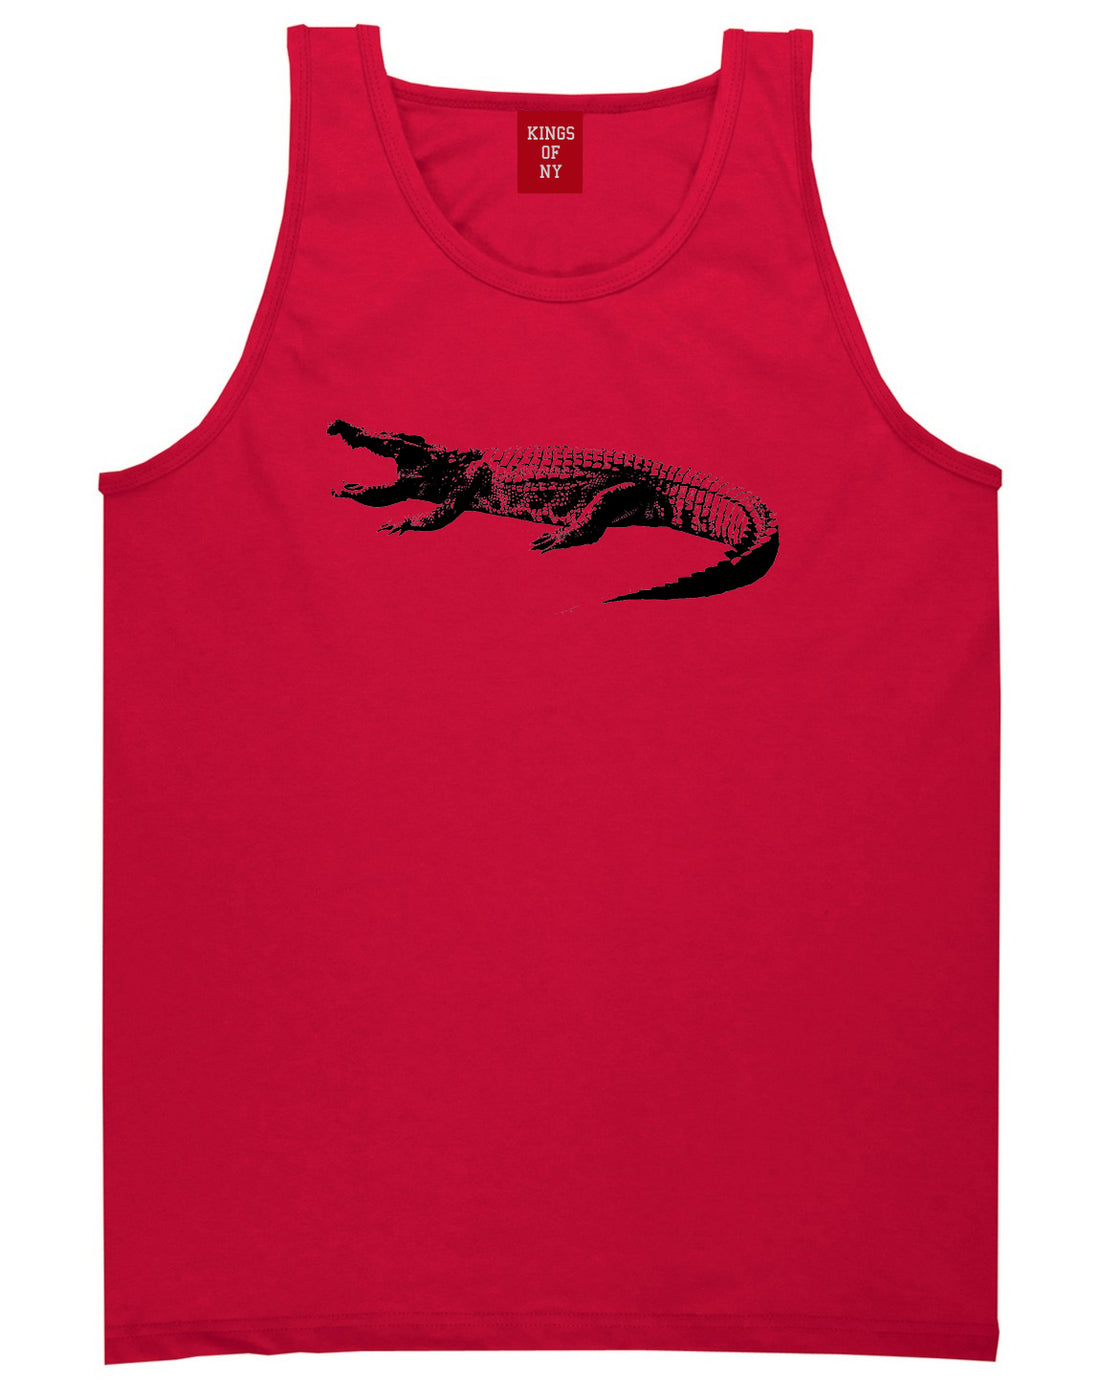 Alligator Red Tank Top Shirt by Kings Of NY